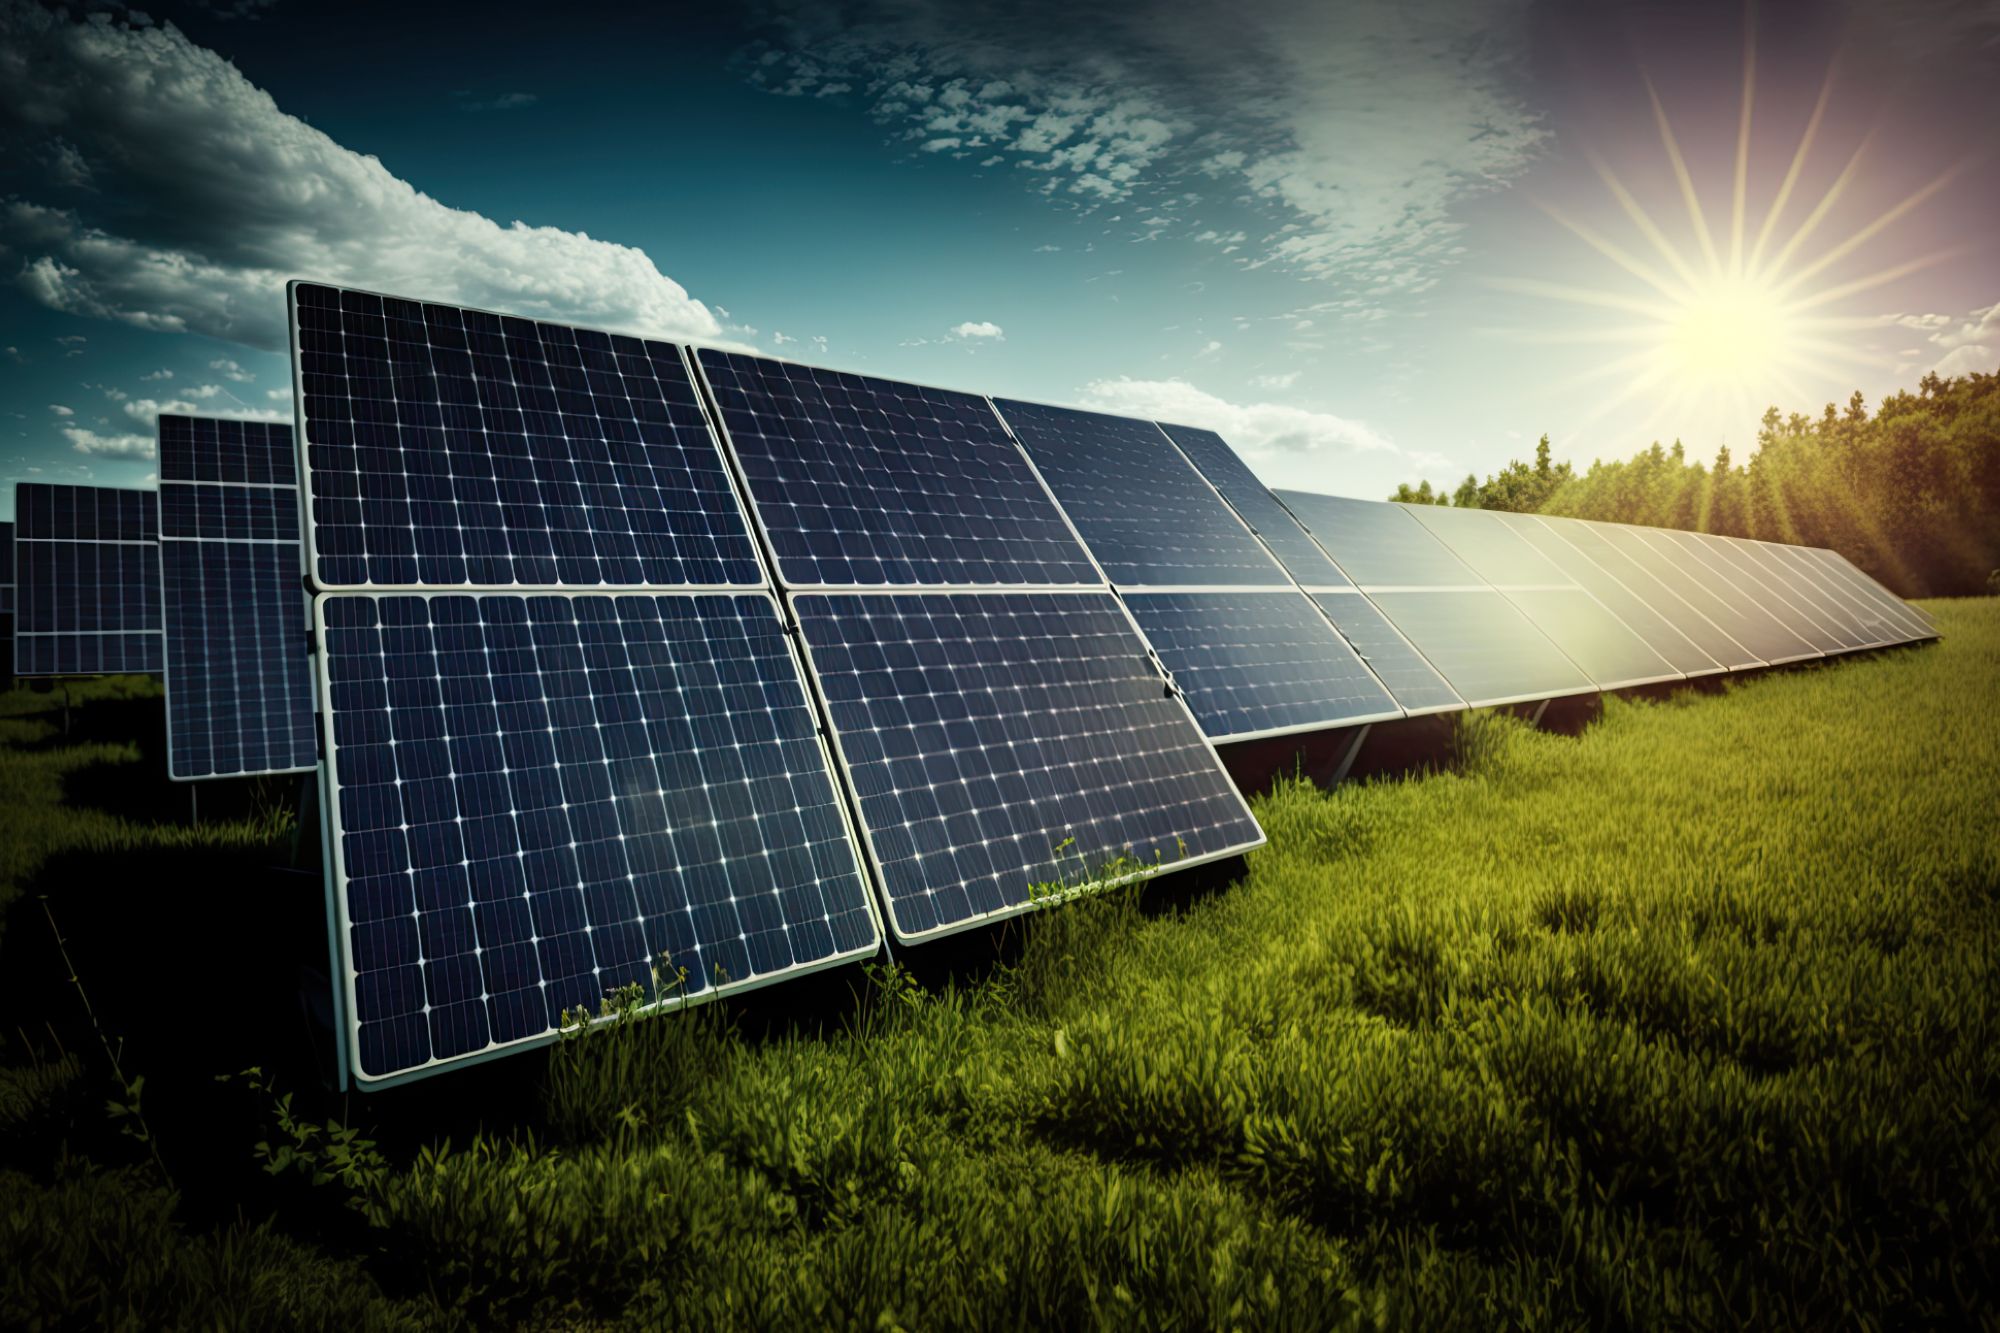 Hinduja Renewables secures 140MW solar project in GUVNL bid, eyes potential 280MW expansion